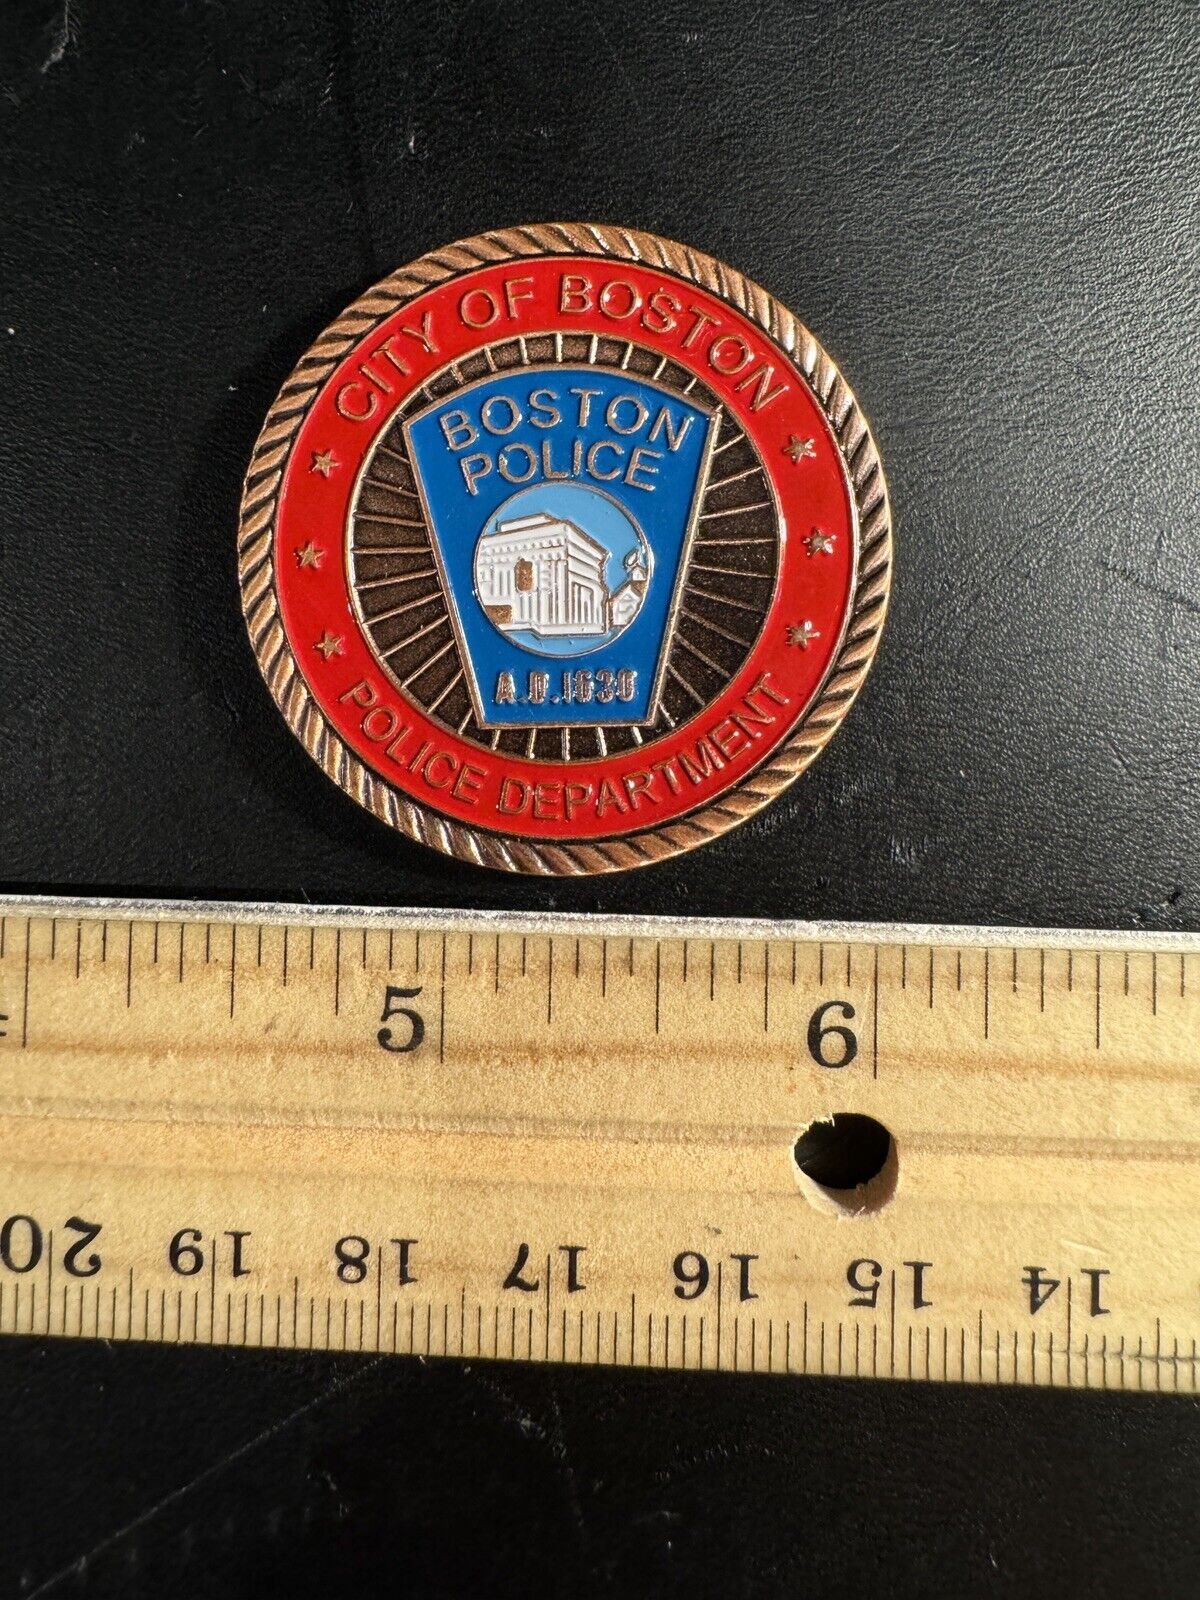 challenge coin Boston Police Department.